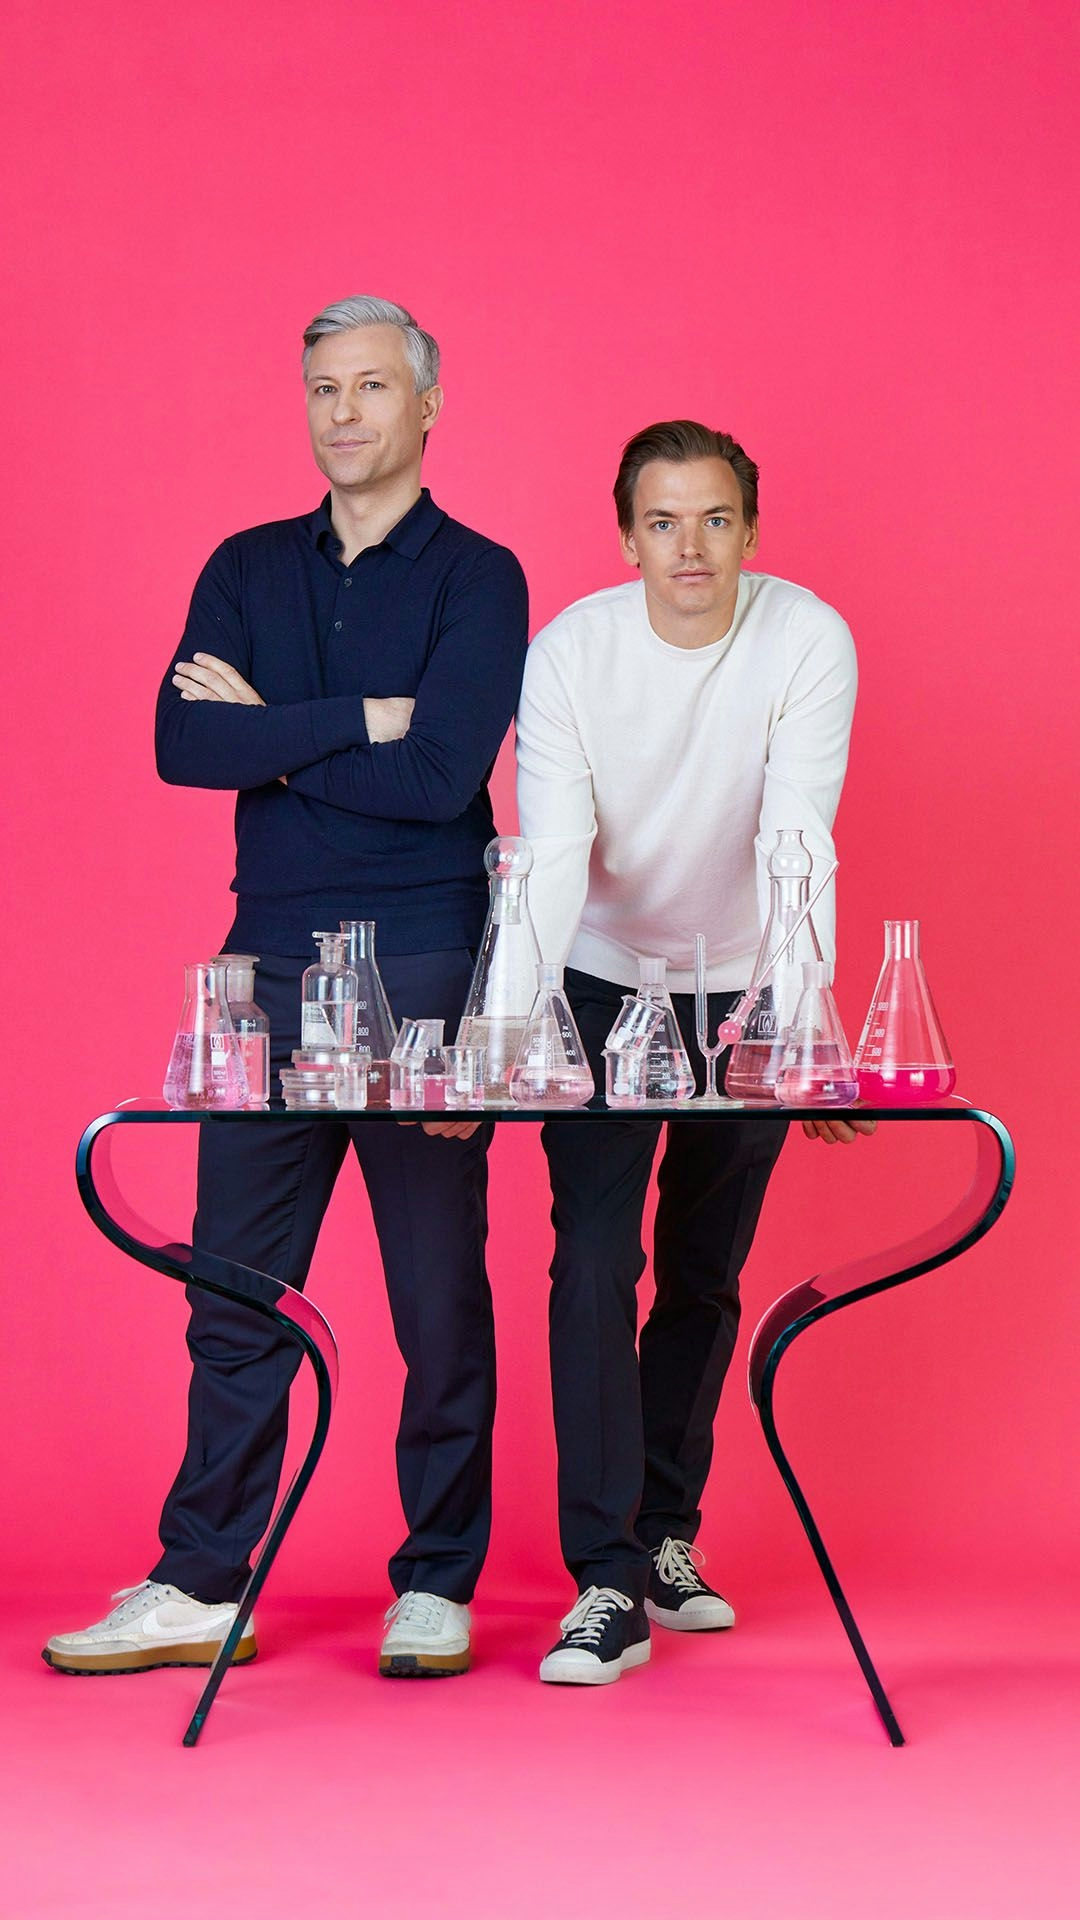 Two men standing behind a table full of beakers in front of a pink background